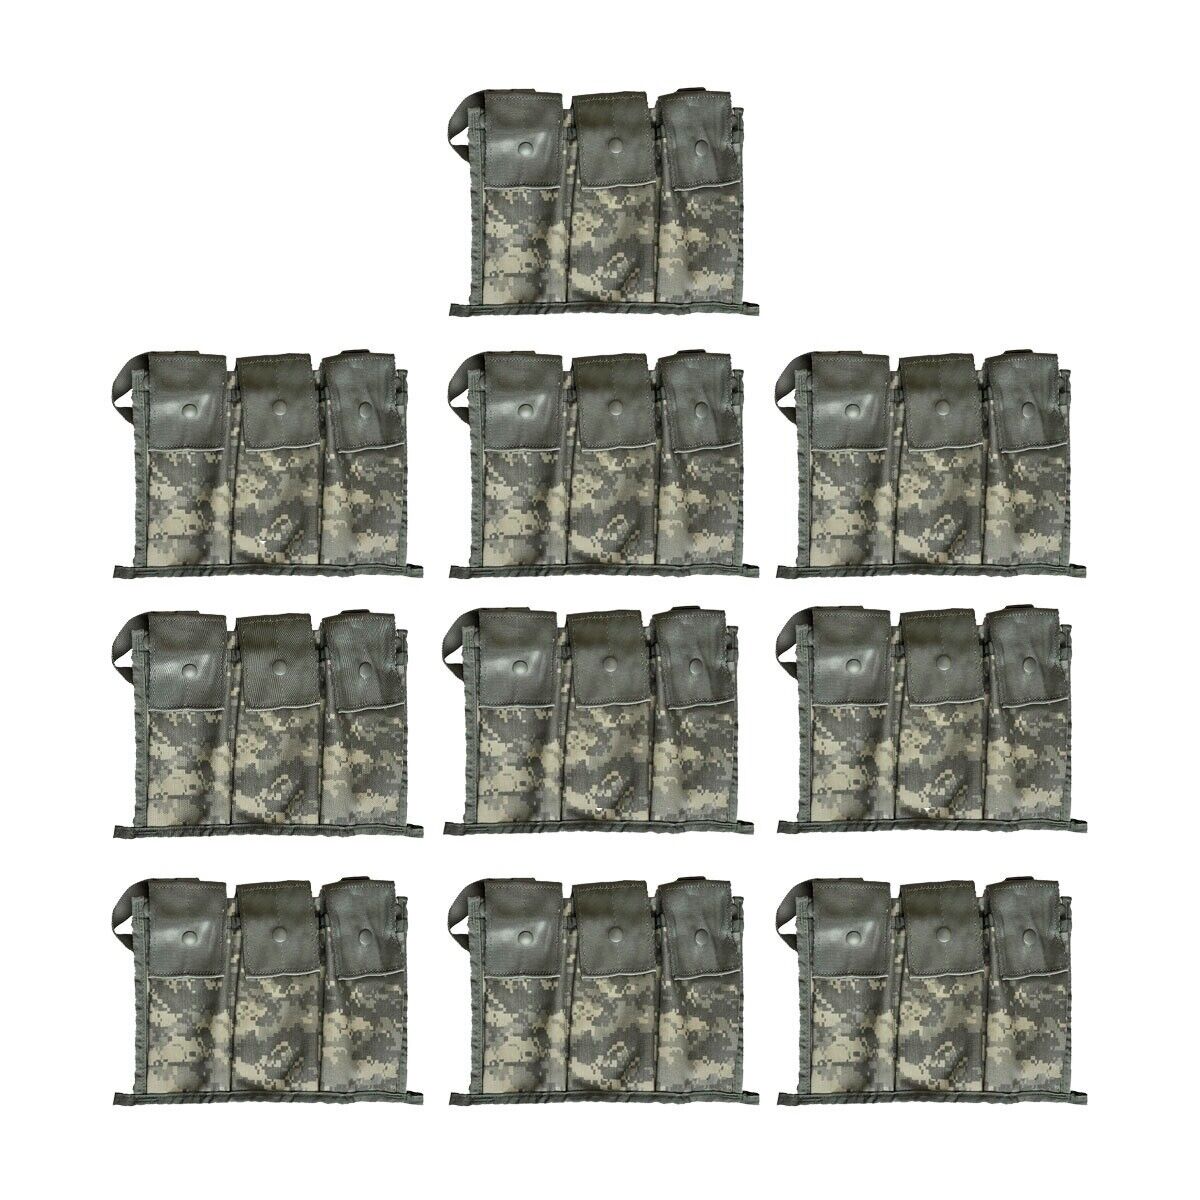 Pack of 10 Military 6 Magazine Bandoleer MOLLE II Mag Ammunition Pouch w/ Strap